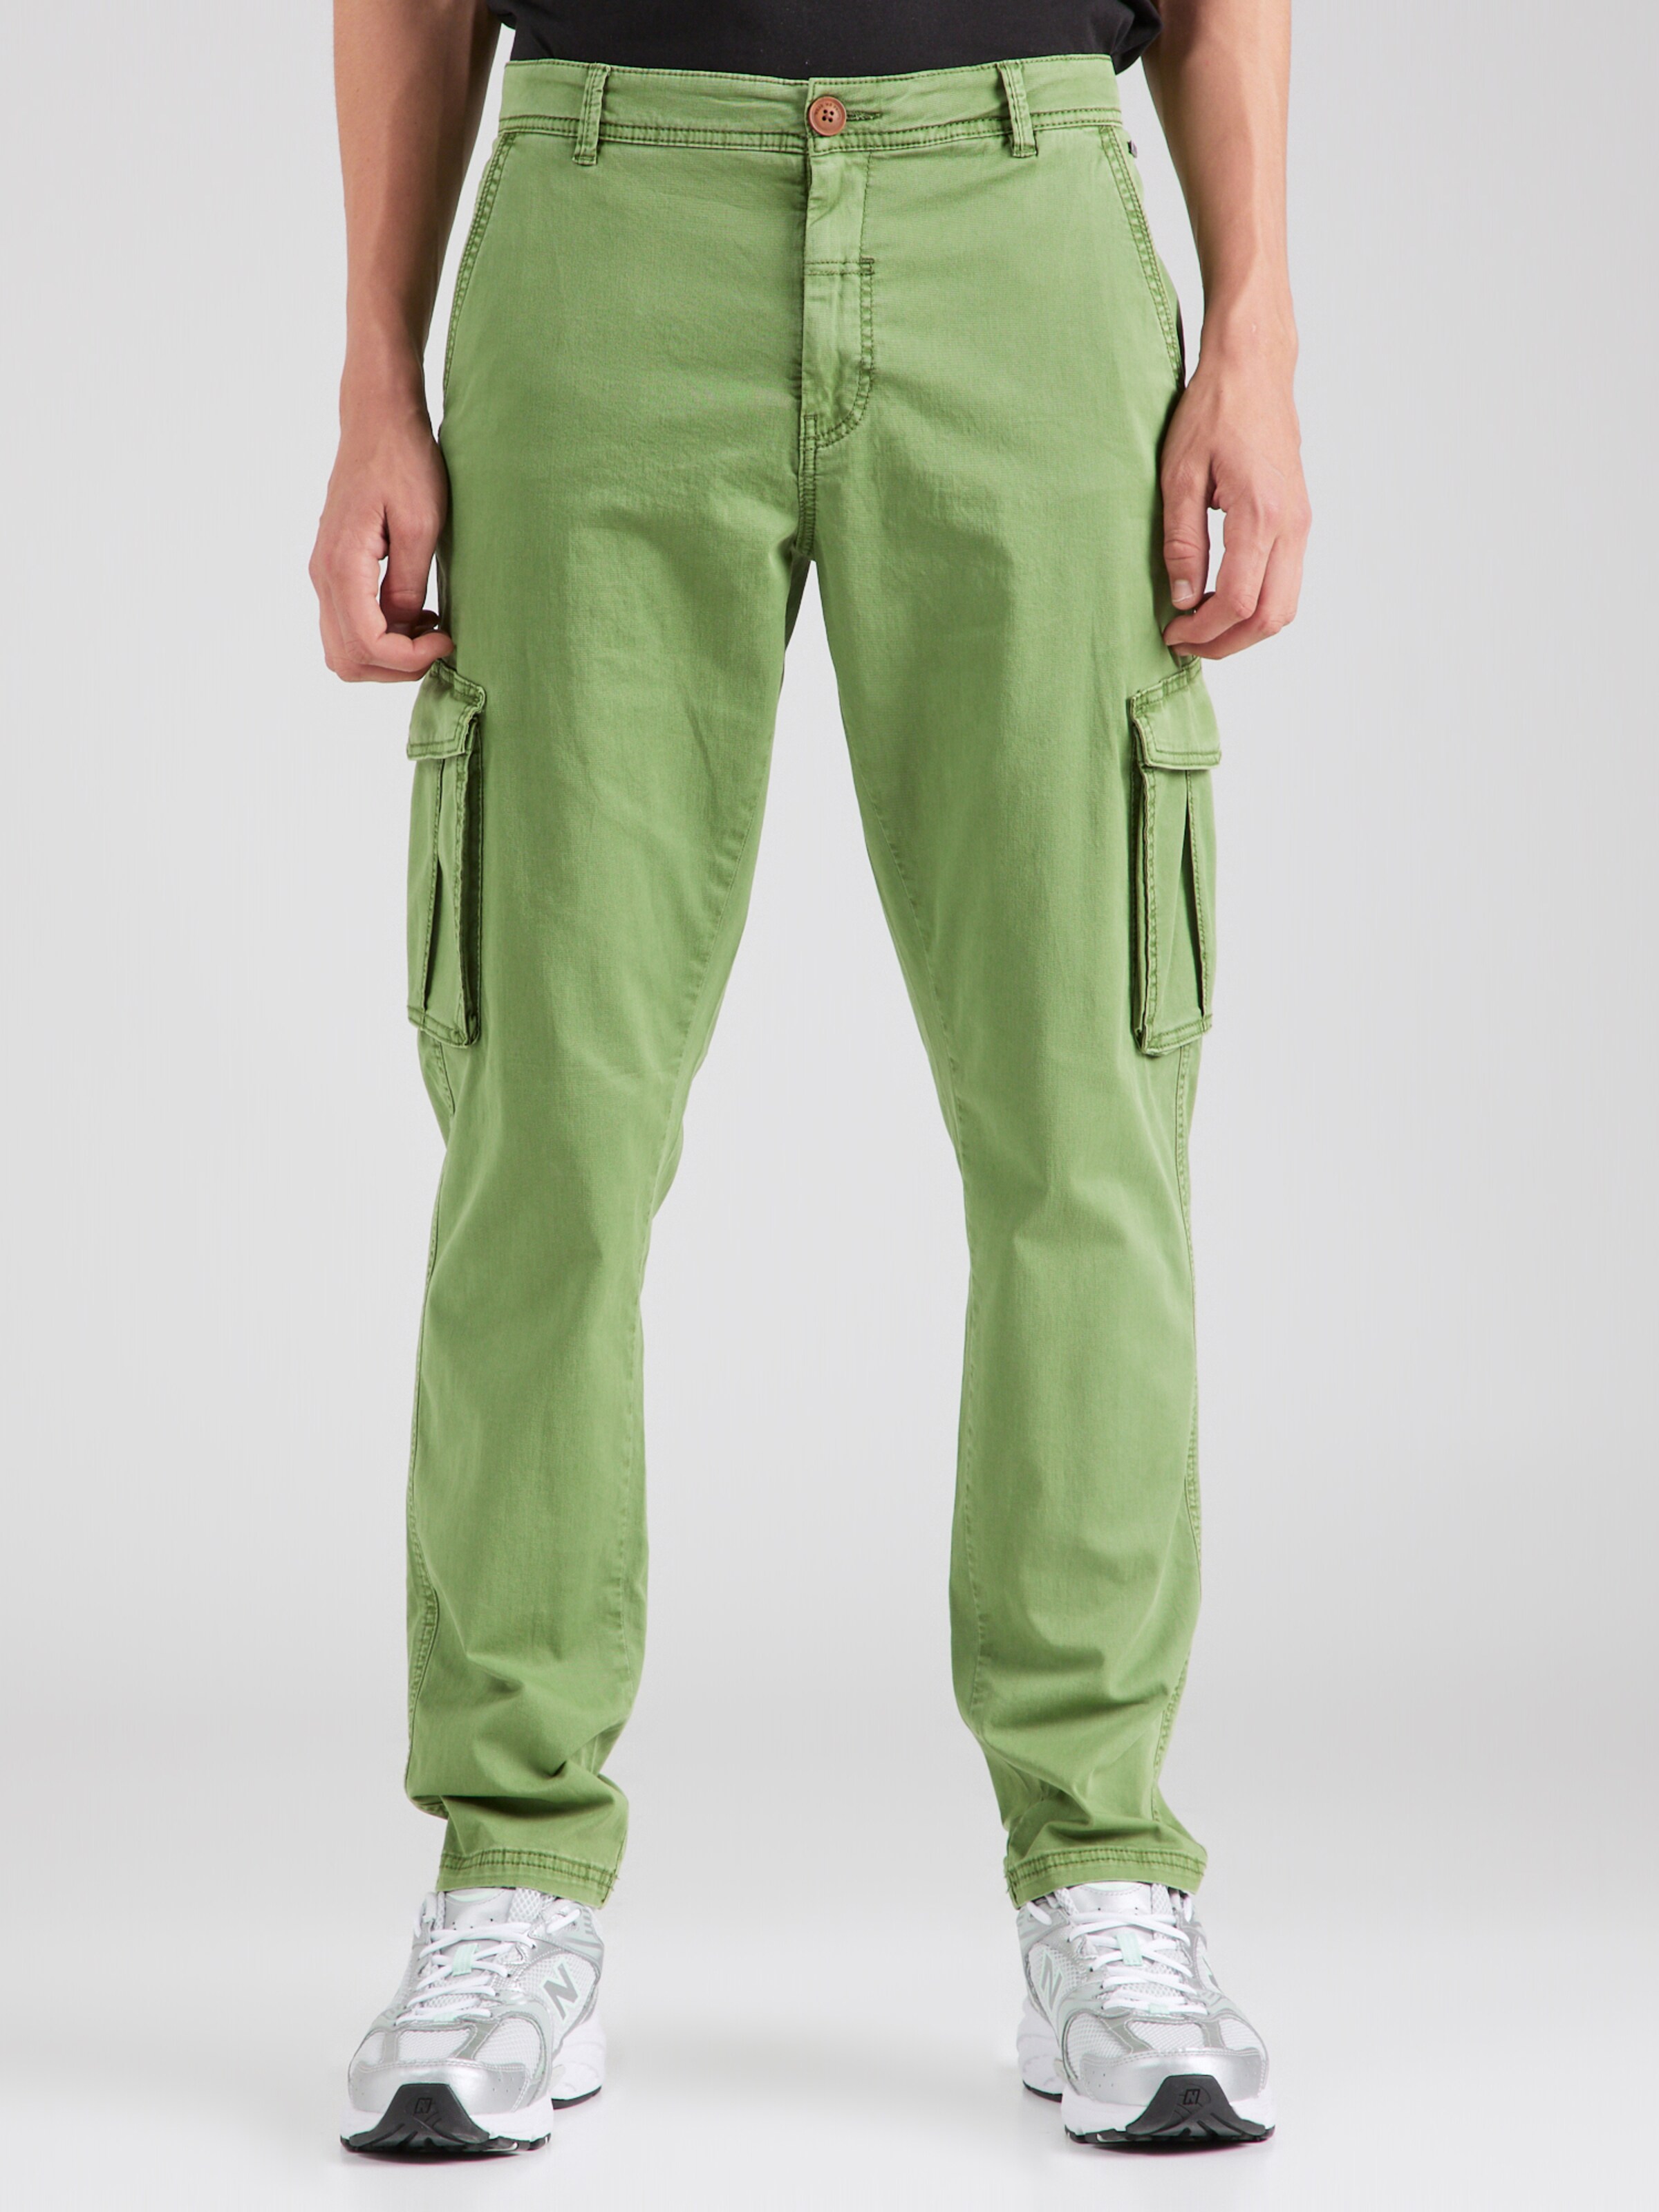 Buy G Star Grey Cargo Pants at In Style – InStyle-Tuscaloosa